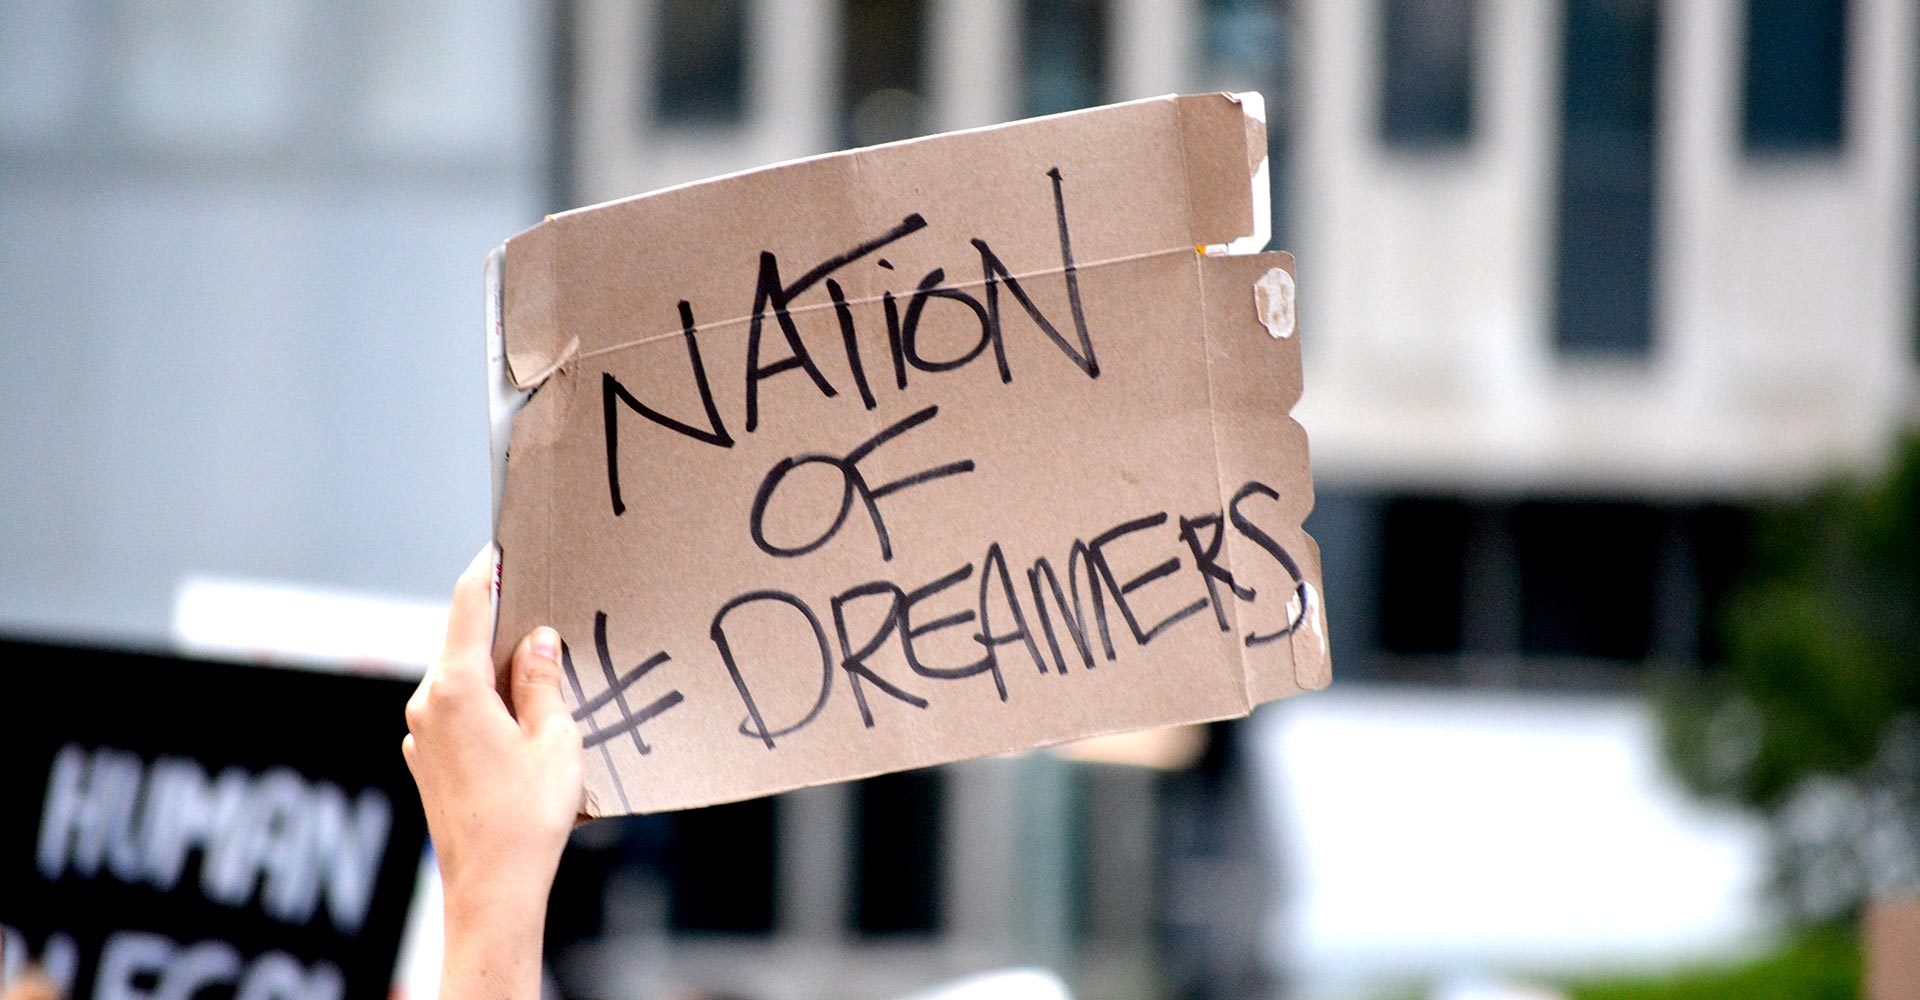 Dreamers keep dreaming after Supreme Court win